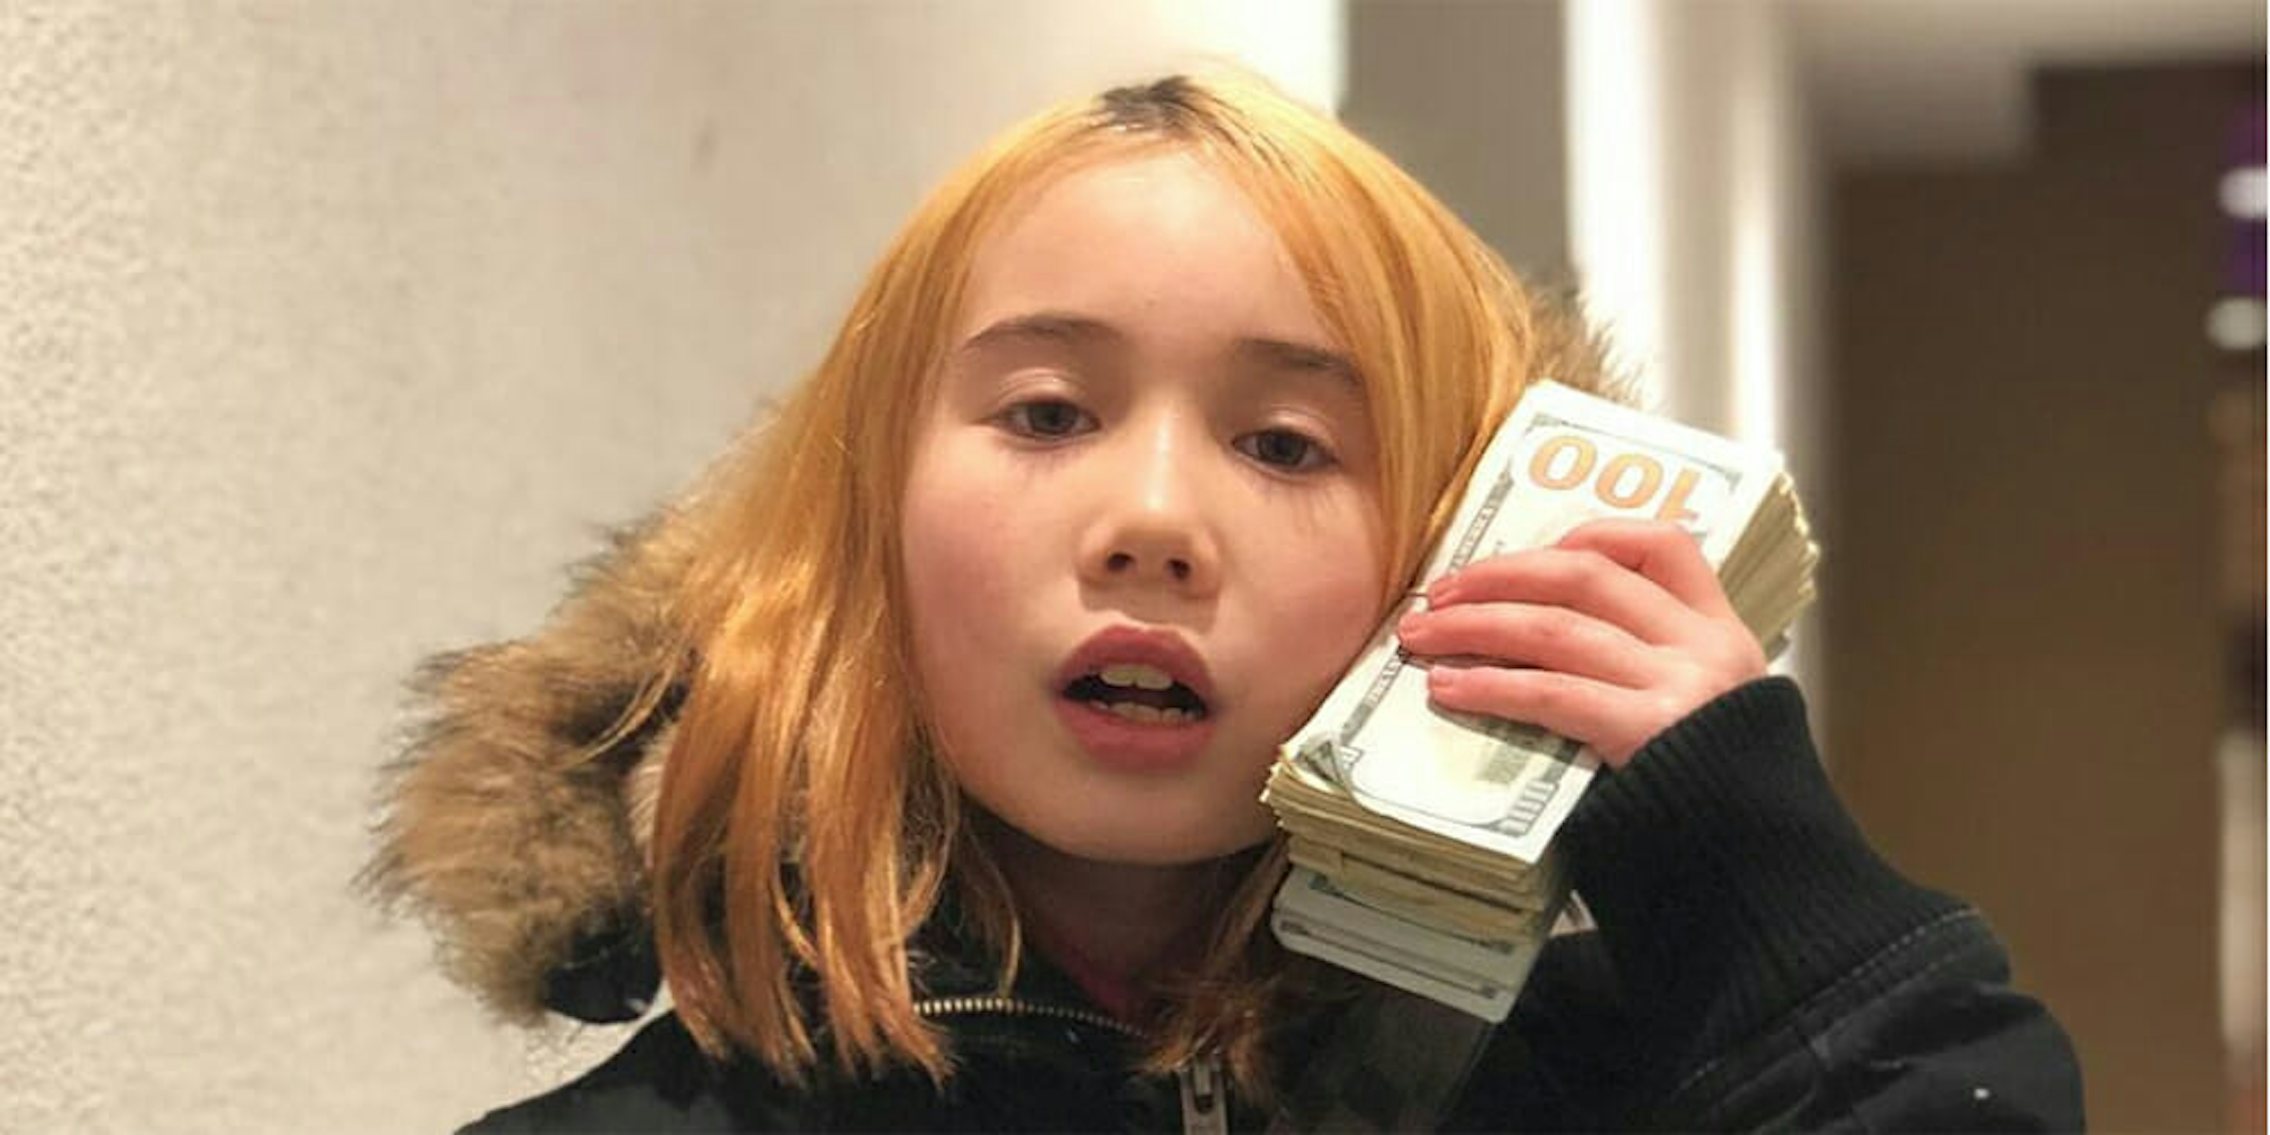 Preteen Instagram sensation Lil Tay's videos reportedly got her mom fired from her Vancouver real estate job.